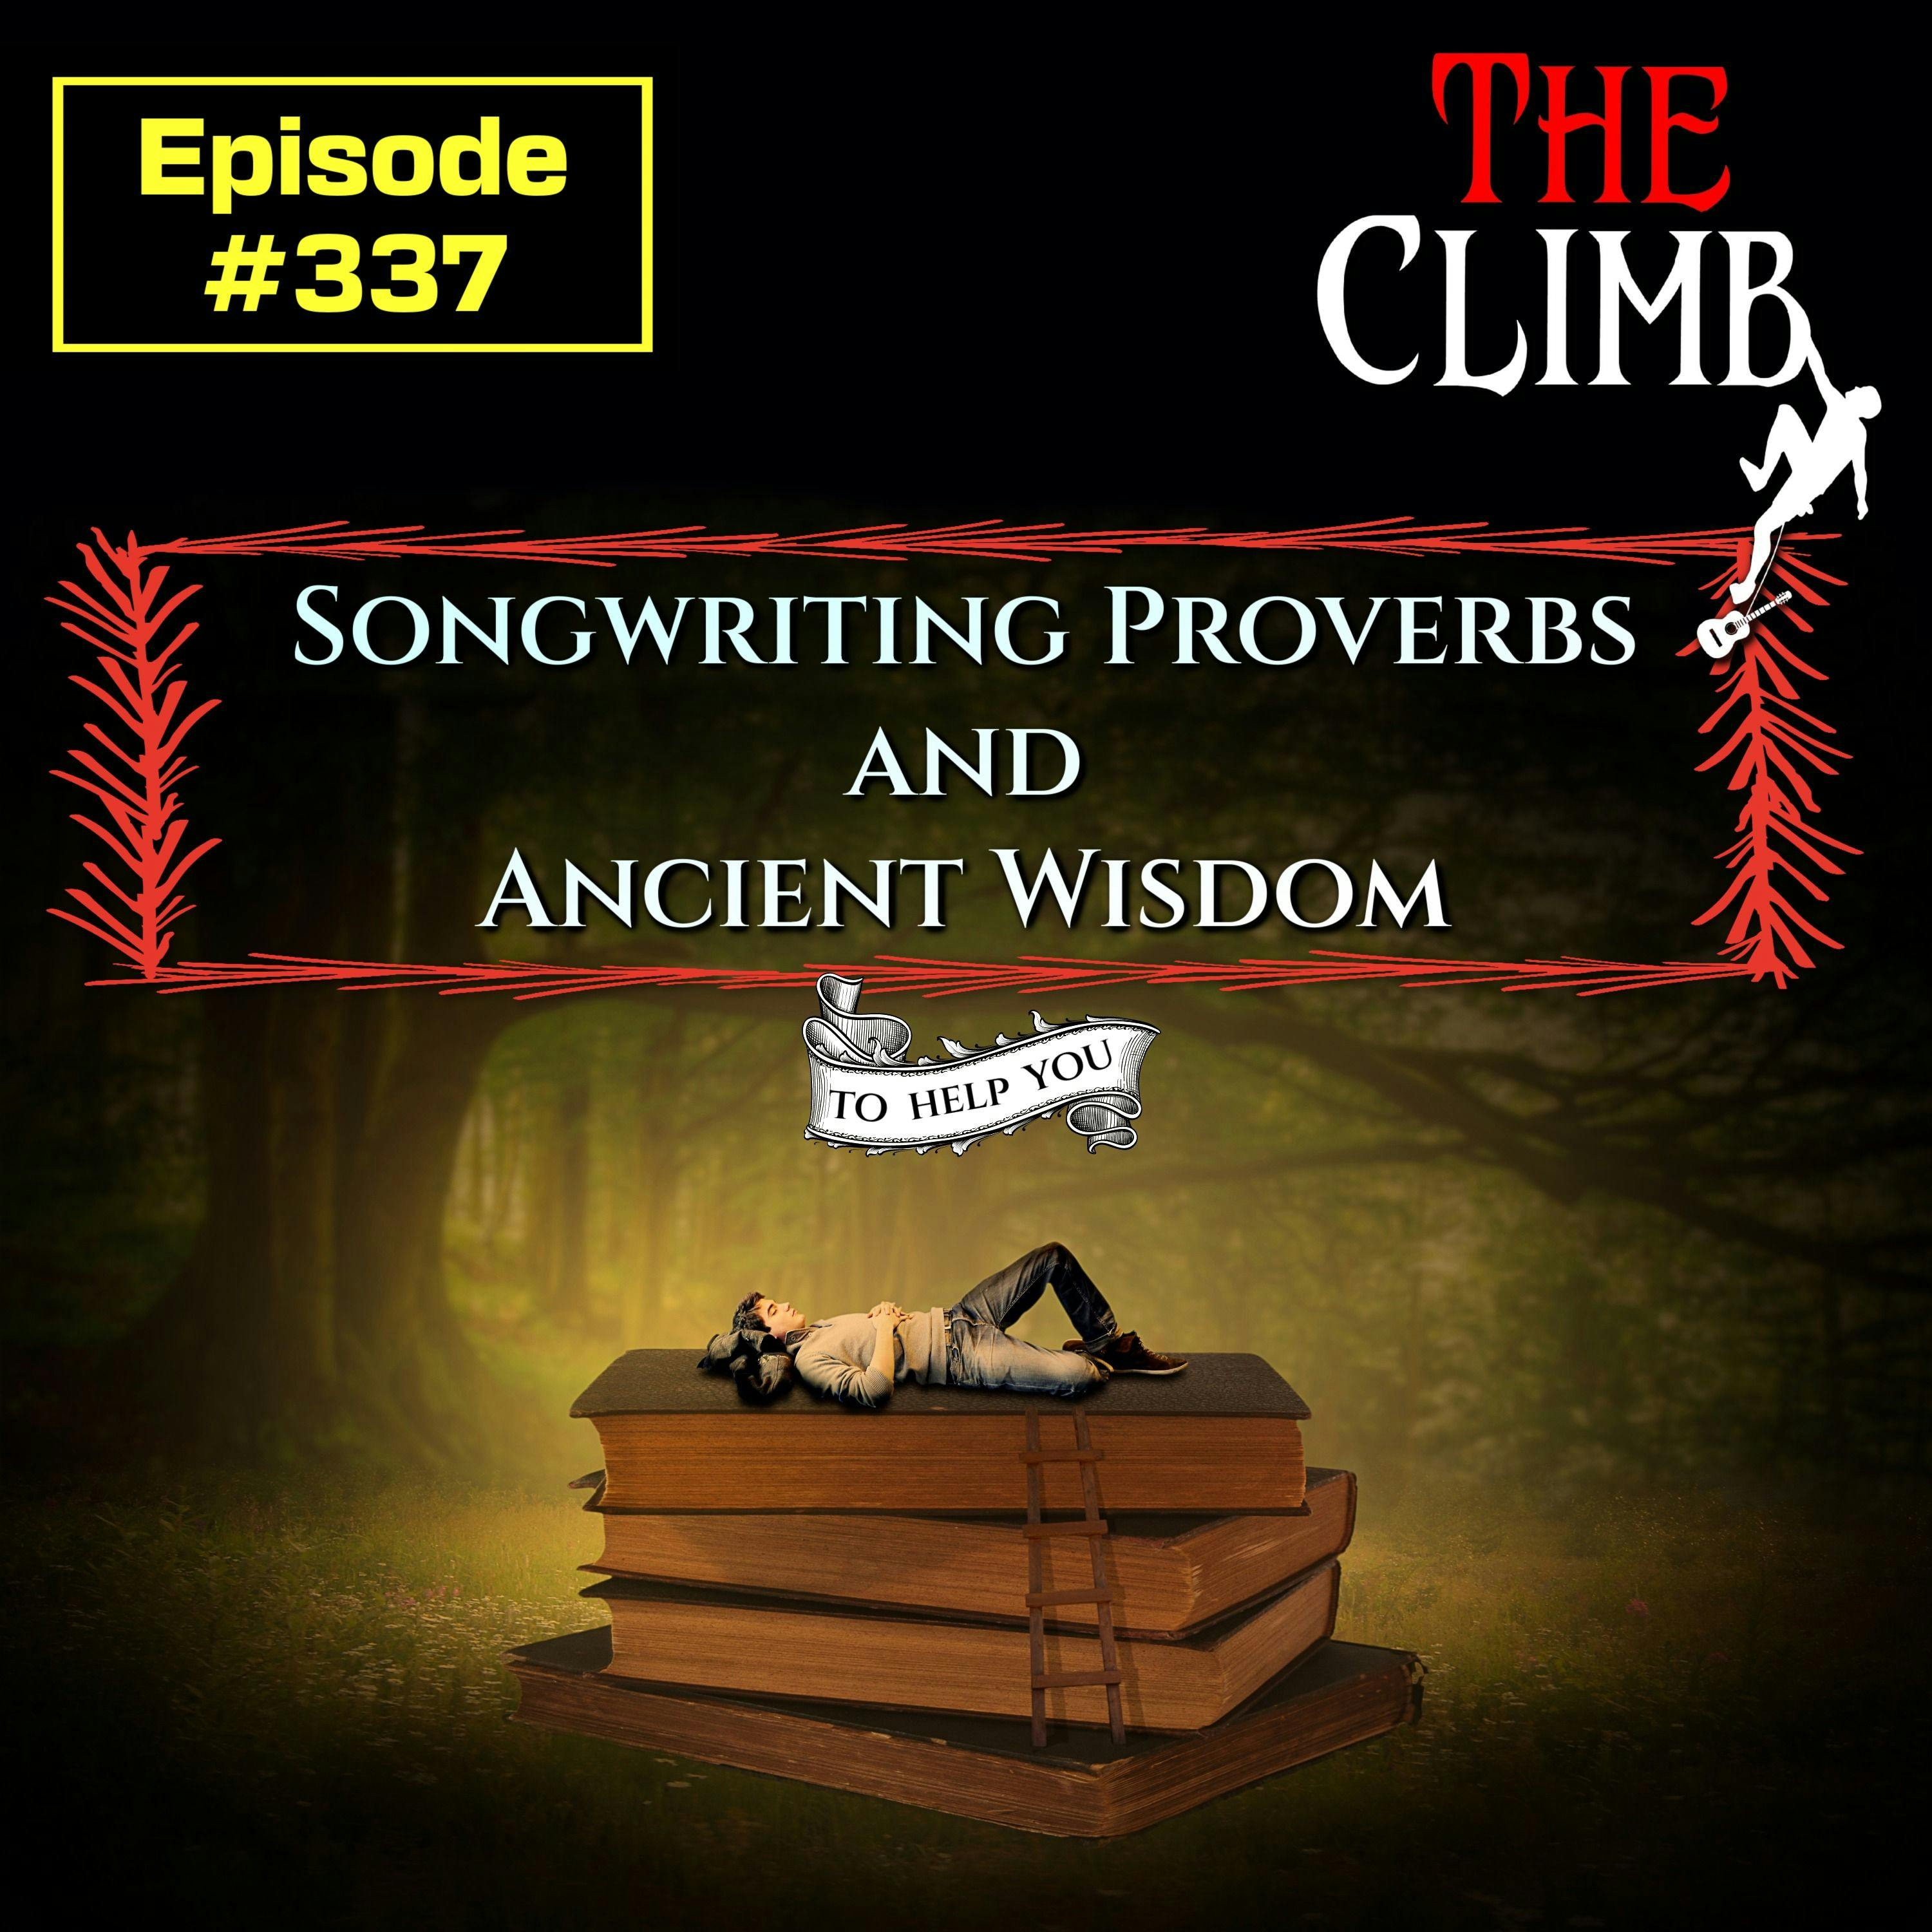 Ep 337: Songwriter Proverbs & Ancient Wisdom To Help You